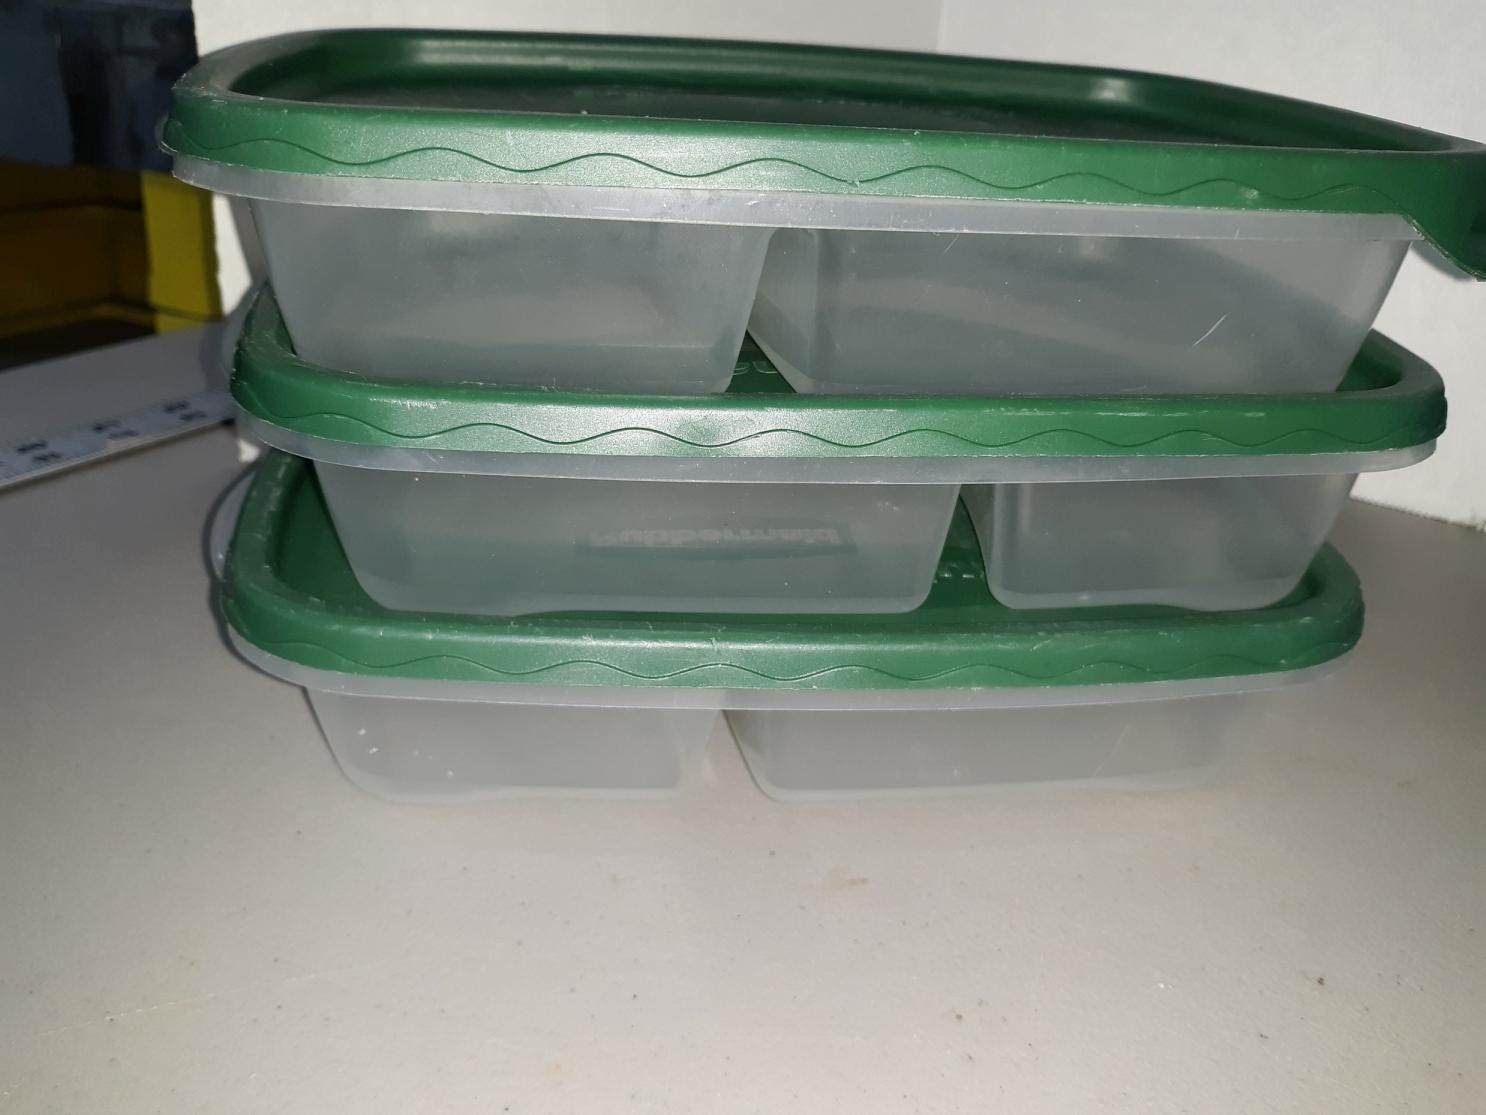 Snap Pak New, Rubbermaid Divided Containers, Lunch Container